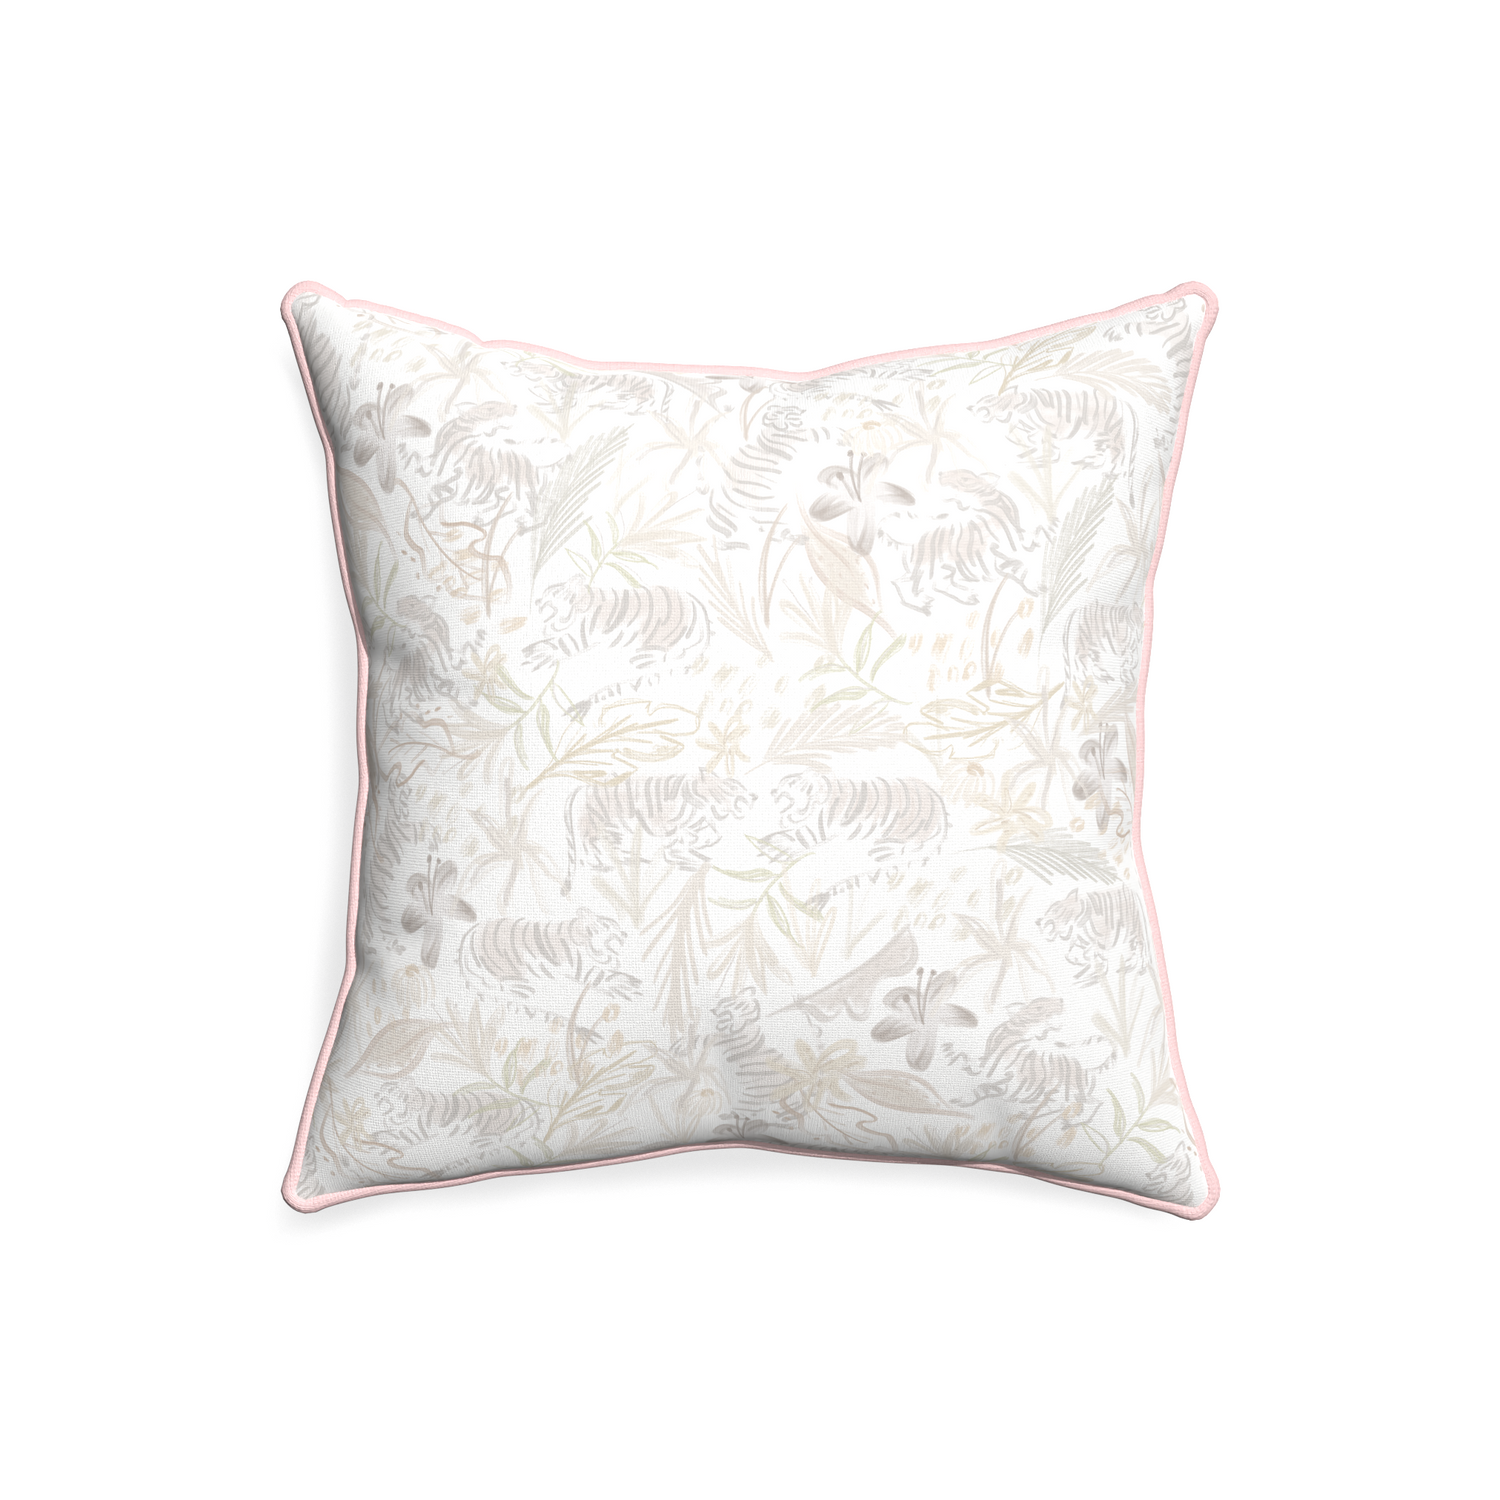 20-square frida sand custom beige chinoiserie tigerpillow with petal piping on white background